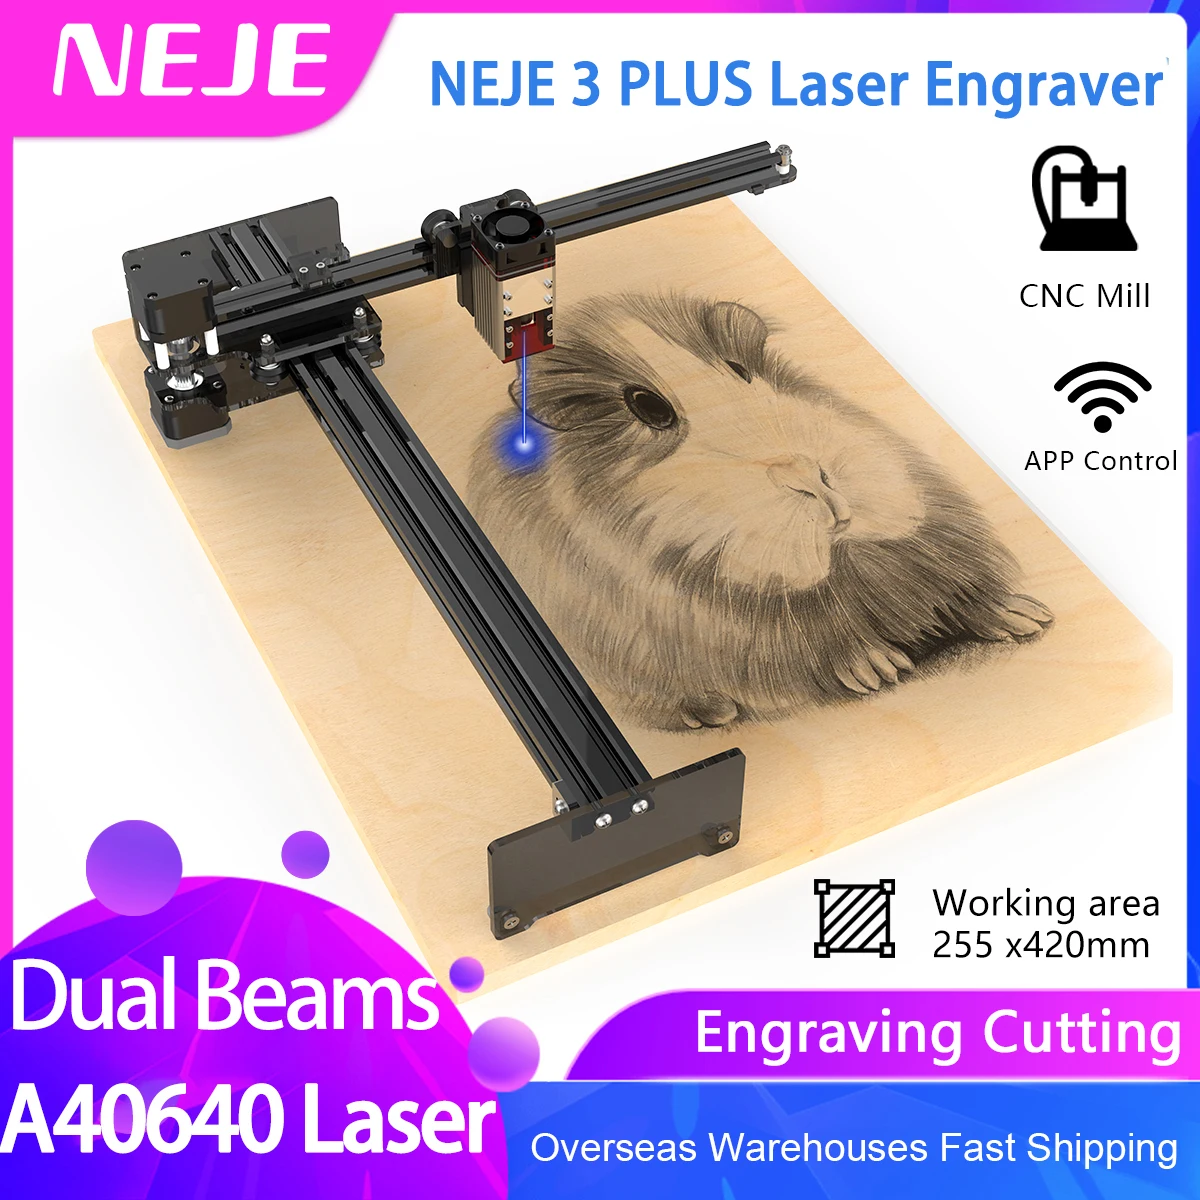 NEJE 3 Plus Dual Beam Laser Engraver and Cutter, 255x420mm CNC Wood Router / Engraving / Cutting Machine